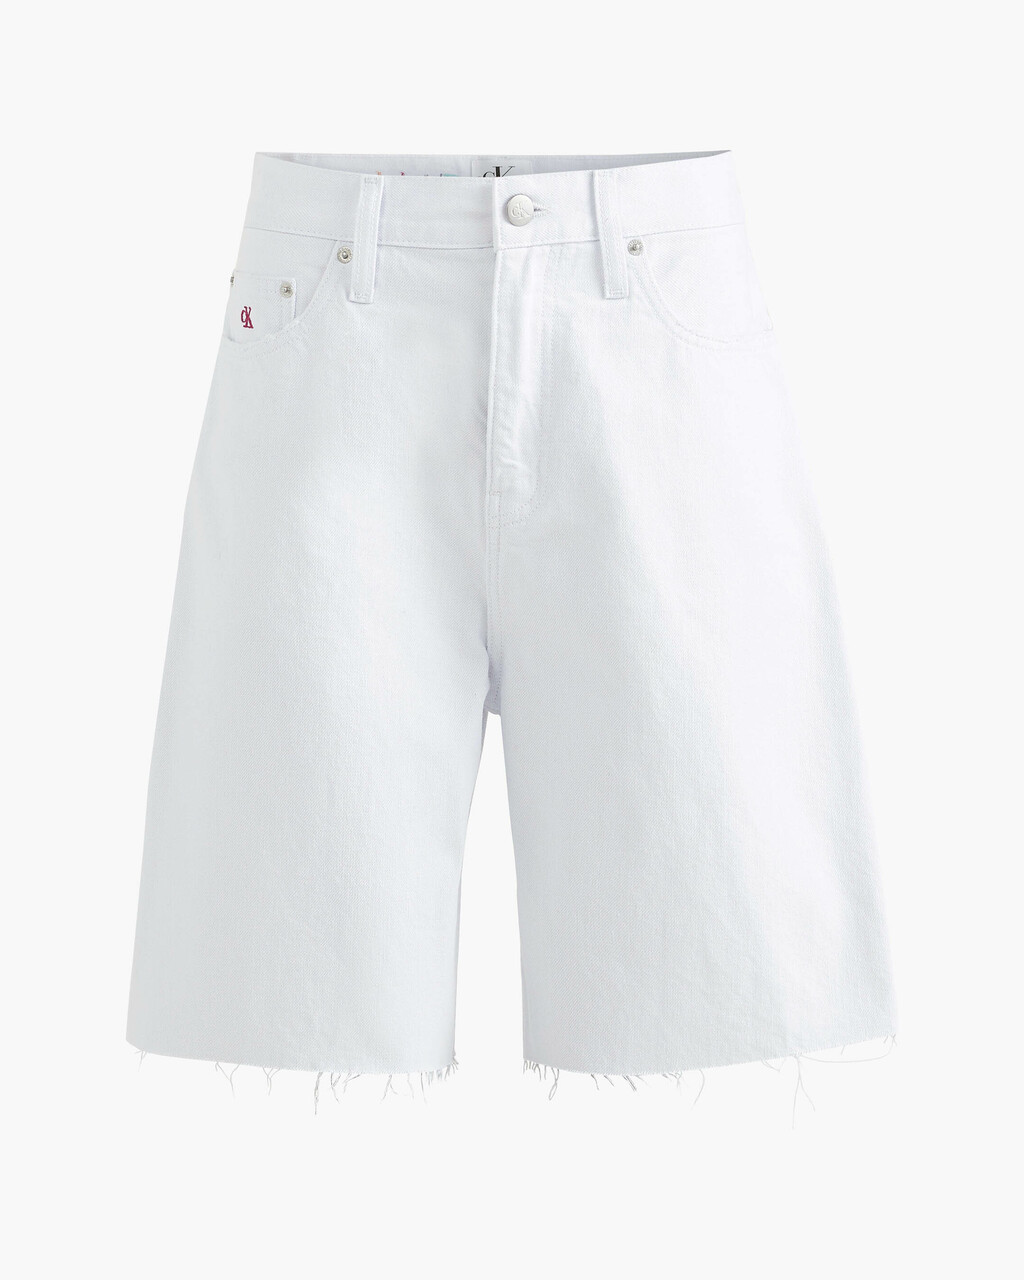 PRIDE HIGH RISE RELAXED DENIM SHORTS, Bright White, hi-res